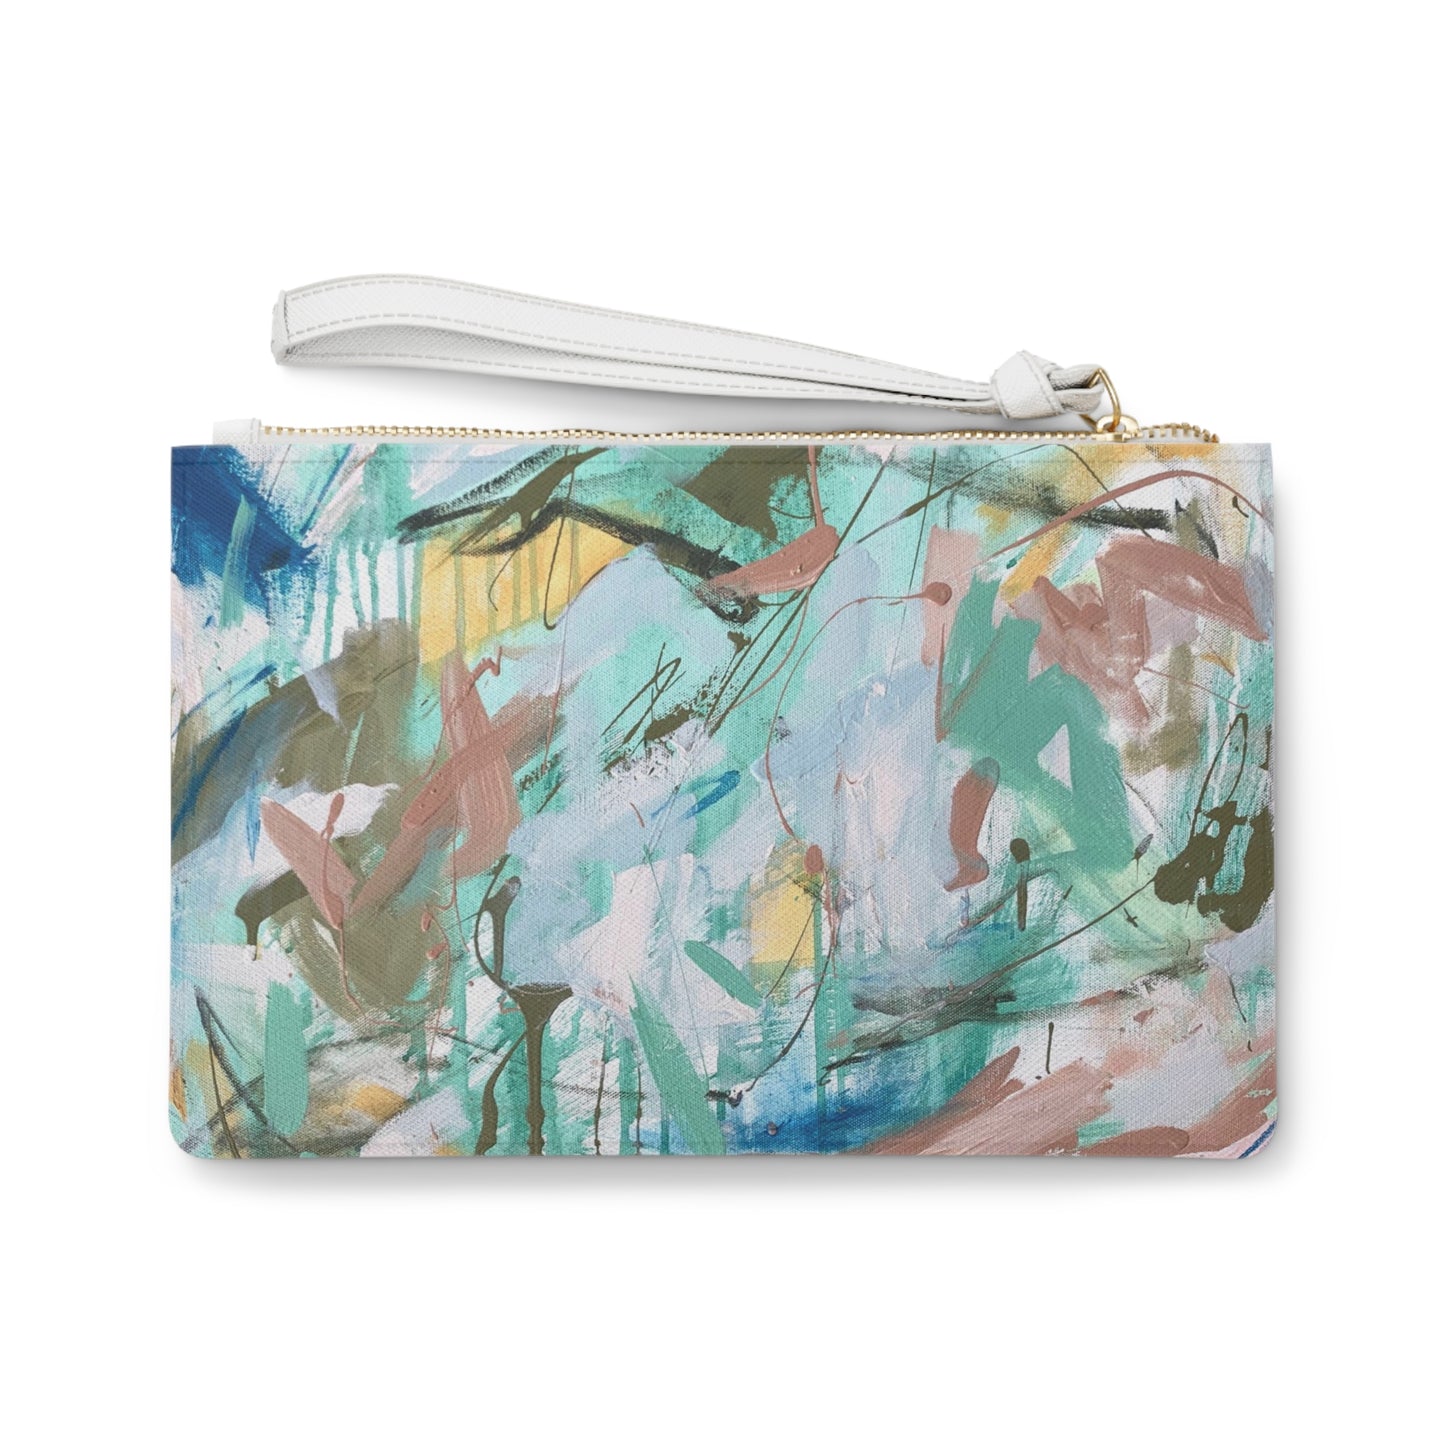 Tropical Hideaway Leather Clutch Bag